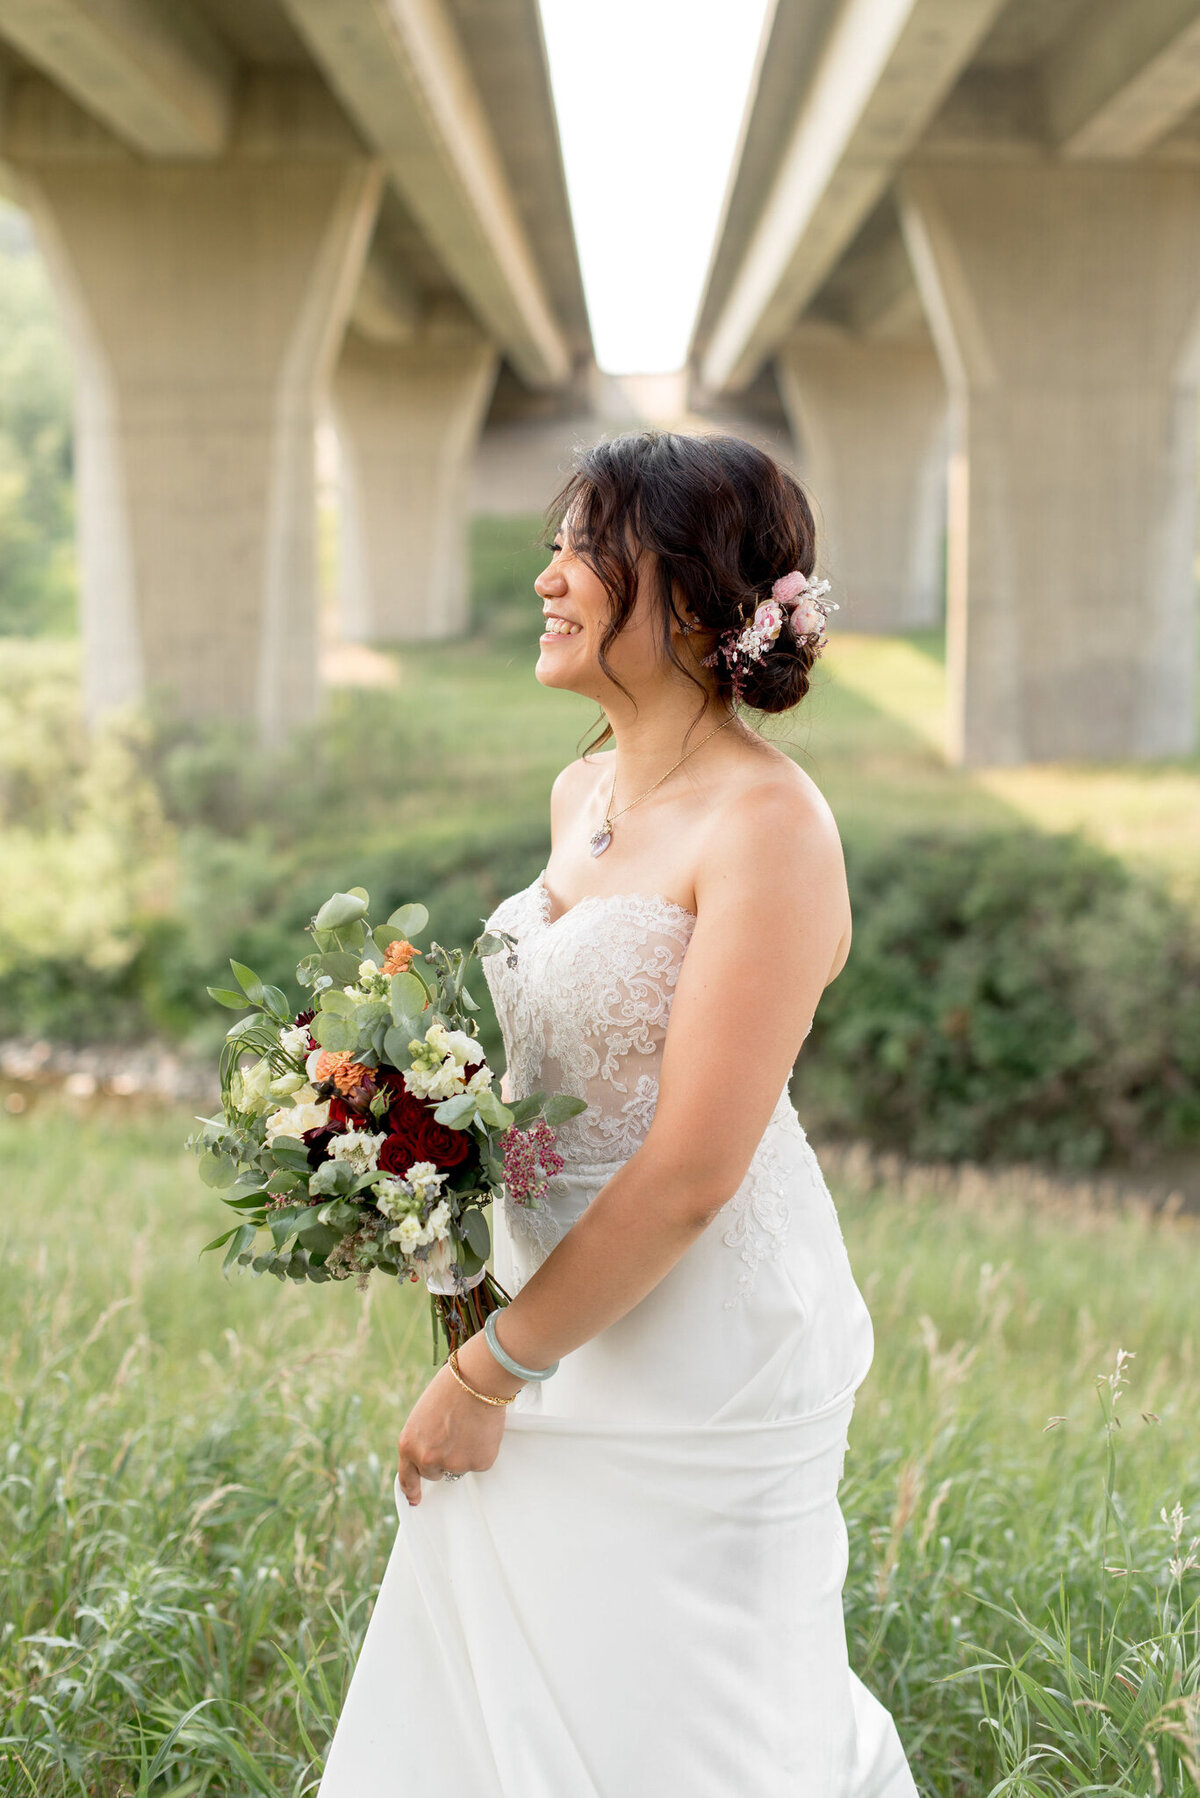 Stunning bride in a gorgeous standing under a bridge wearing a gorgeous, classic A-line wedding gown, with a lace bodice, captured by Janelle Dudzic Photography, colourful and candid wedding photographer in Edmonton, Alberta. Featured on the Bronte Bride Vendor Guide.